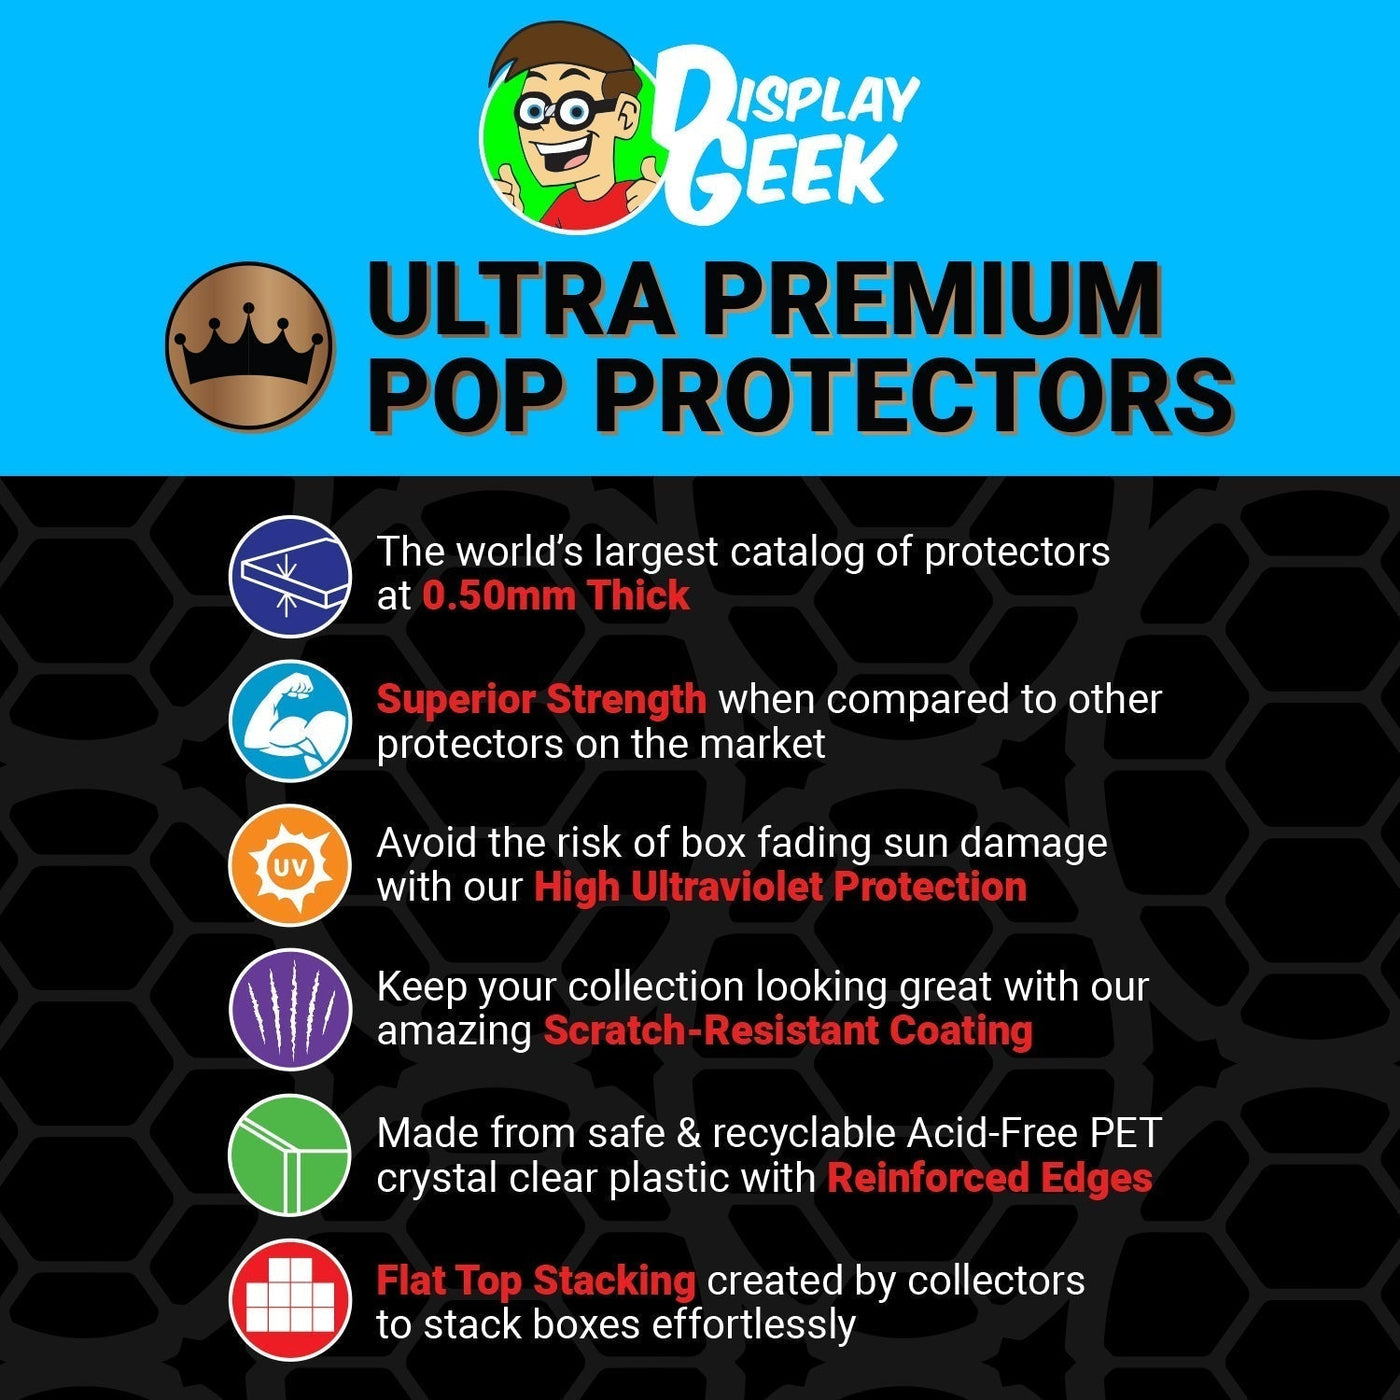 Pop Protector for 6 inch Giant Lady Red Chrome #99 Super Funko Pop on The Protector Guide App by Display Geek